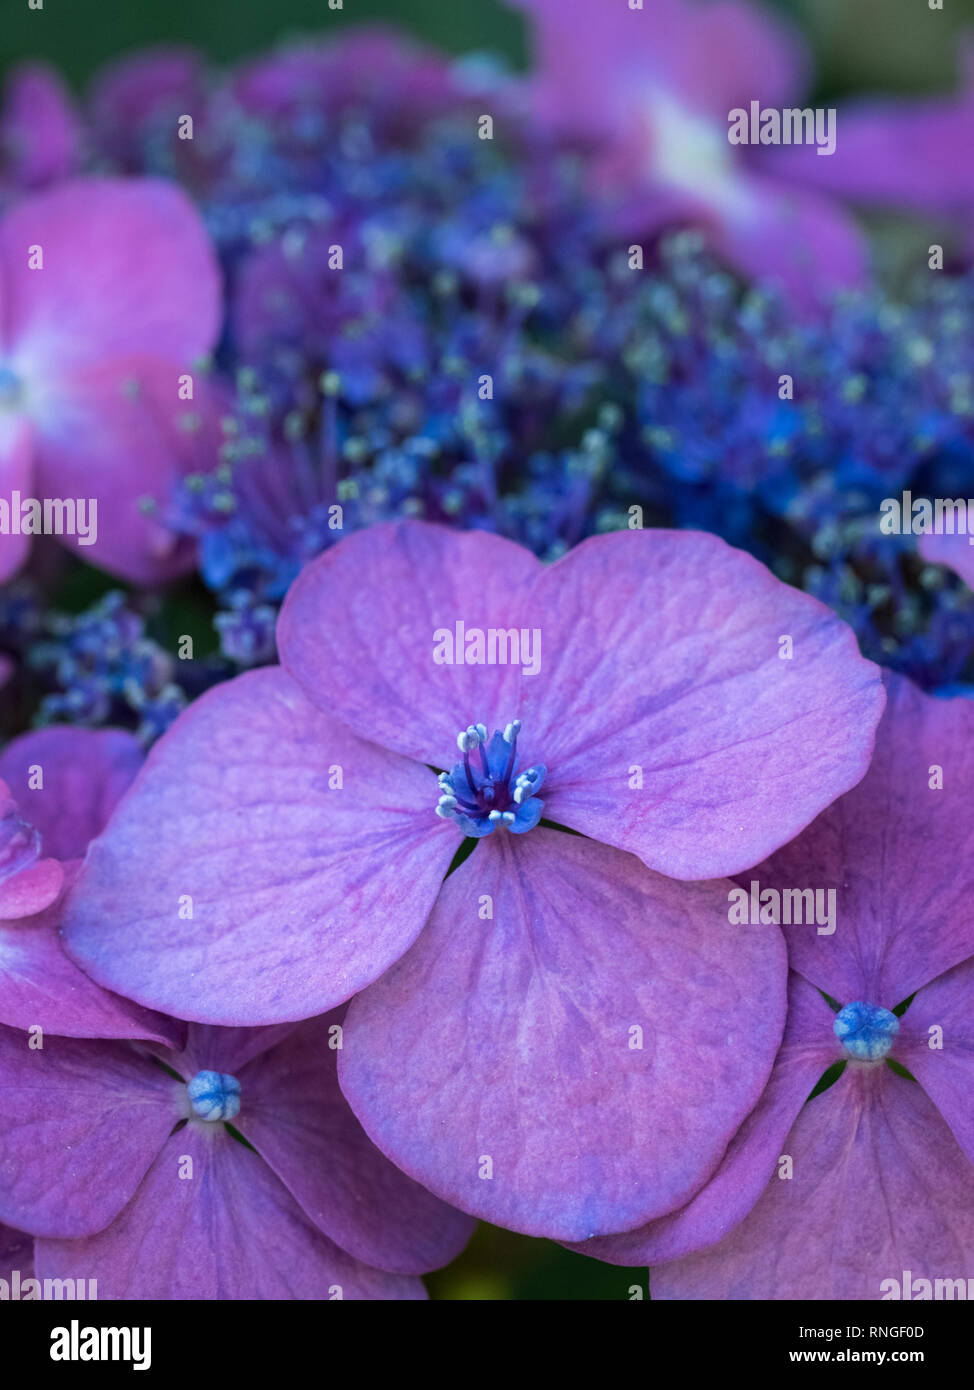 A full frame close up detail of open purple mauve Hydrangea flower from above face on Stock Photo